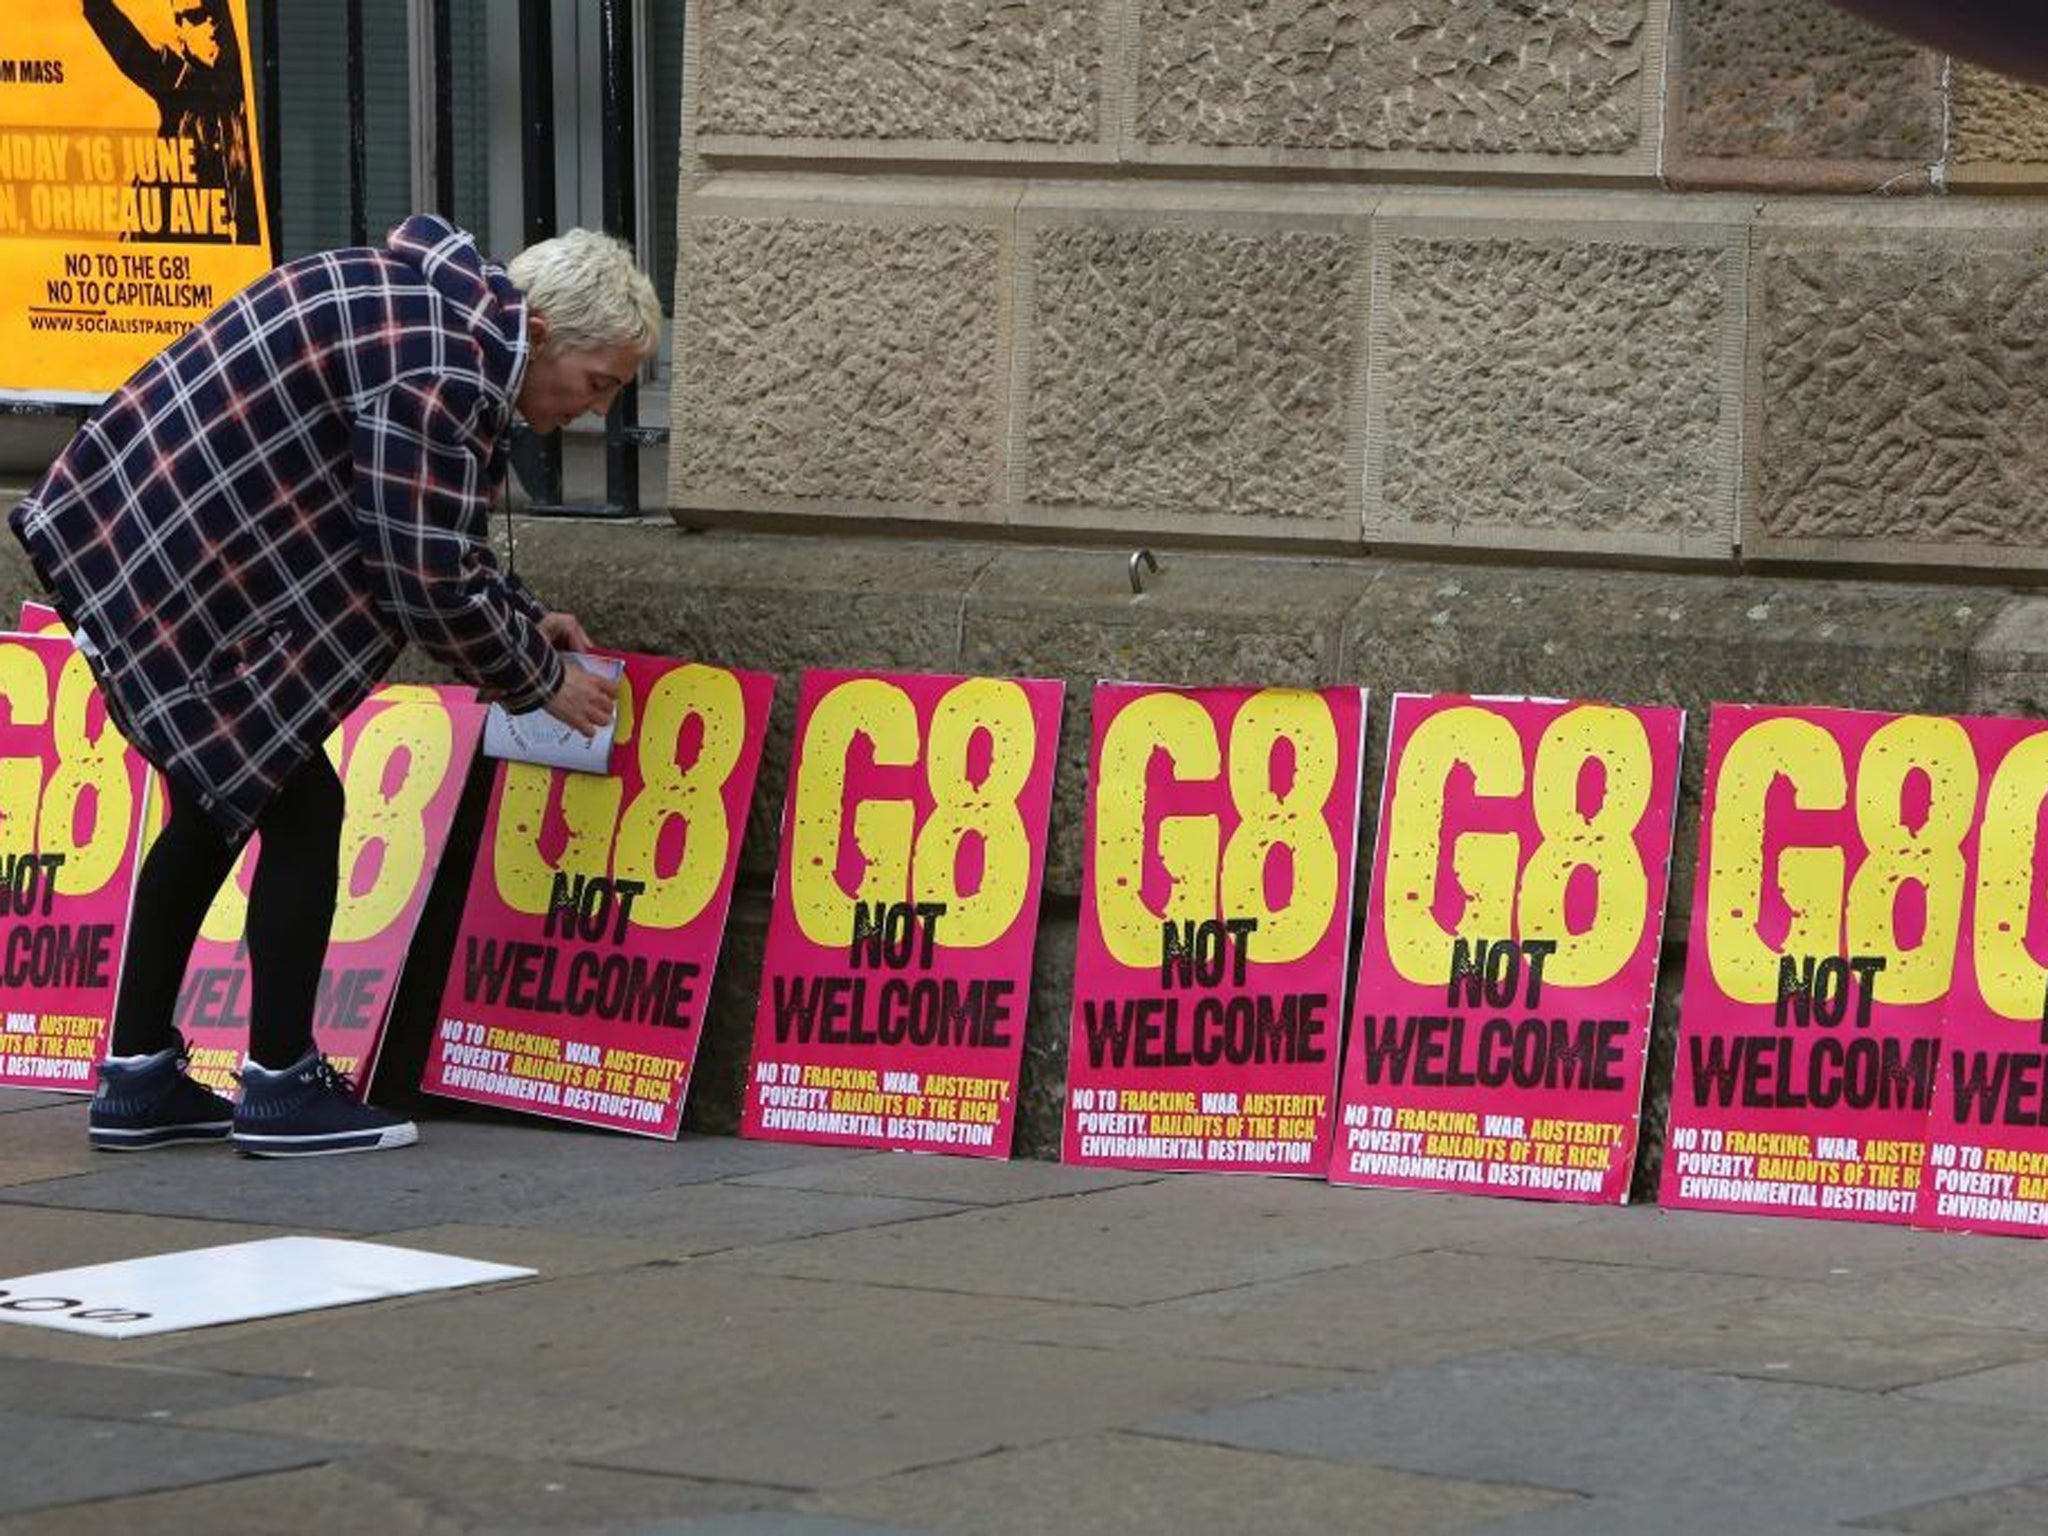 15 June 2013: A protester lays out placards as around 2,000 people marched through Belfast, Northern Ireland, ahead of the G8 summit in County Fermanagh which begins on Monday